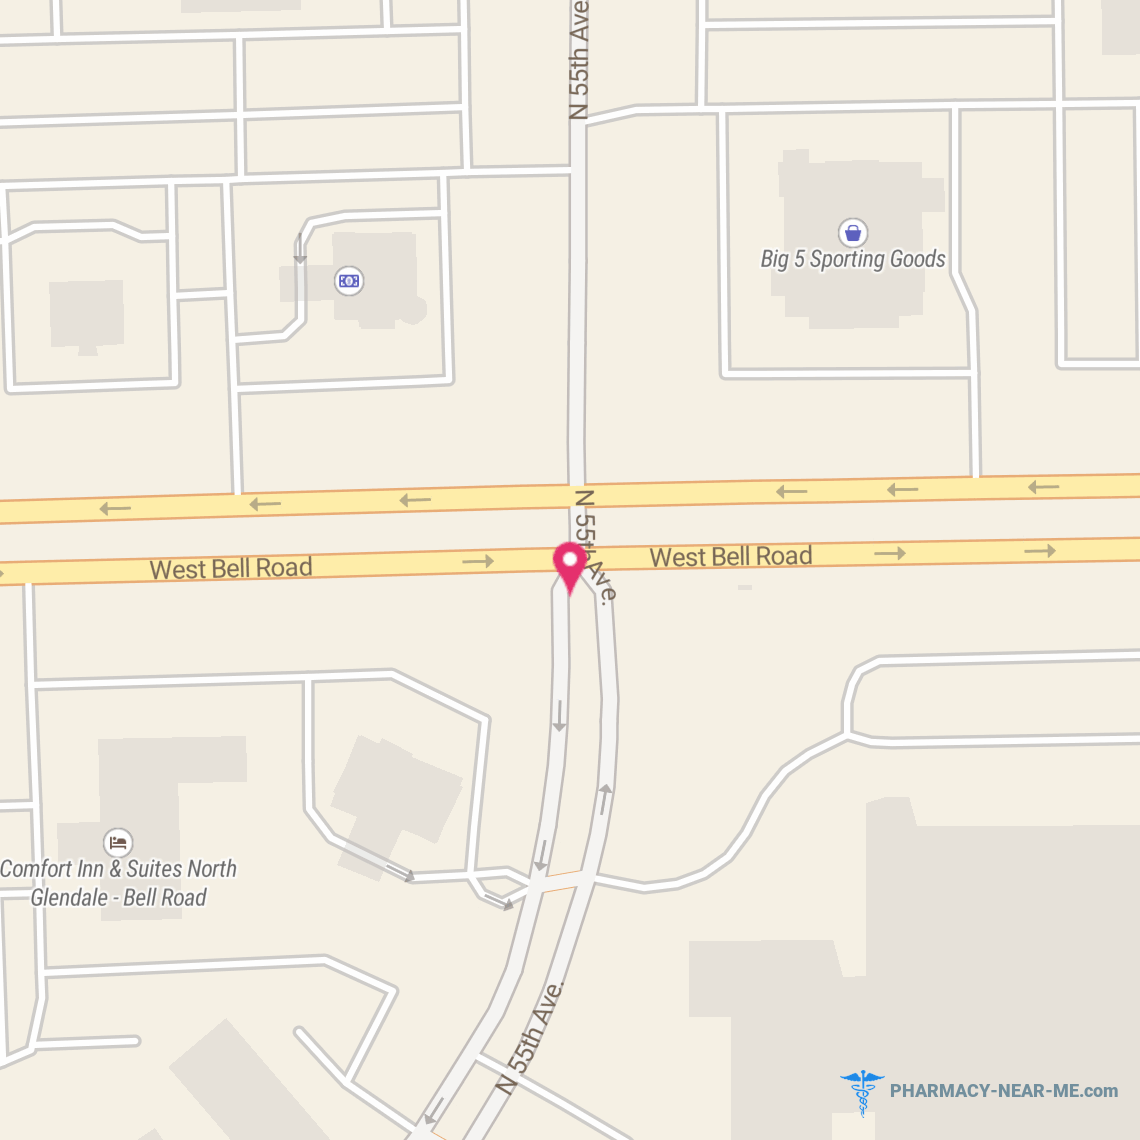 WALGREENS #03049 - Pharmacy Hours, Phone, Reviews & Information: 4965 W Bell Rd, Glendale, Arizona 85306, United States